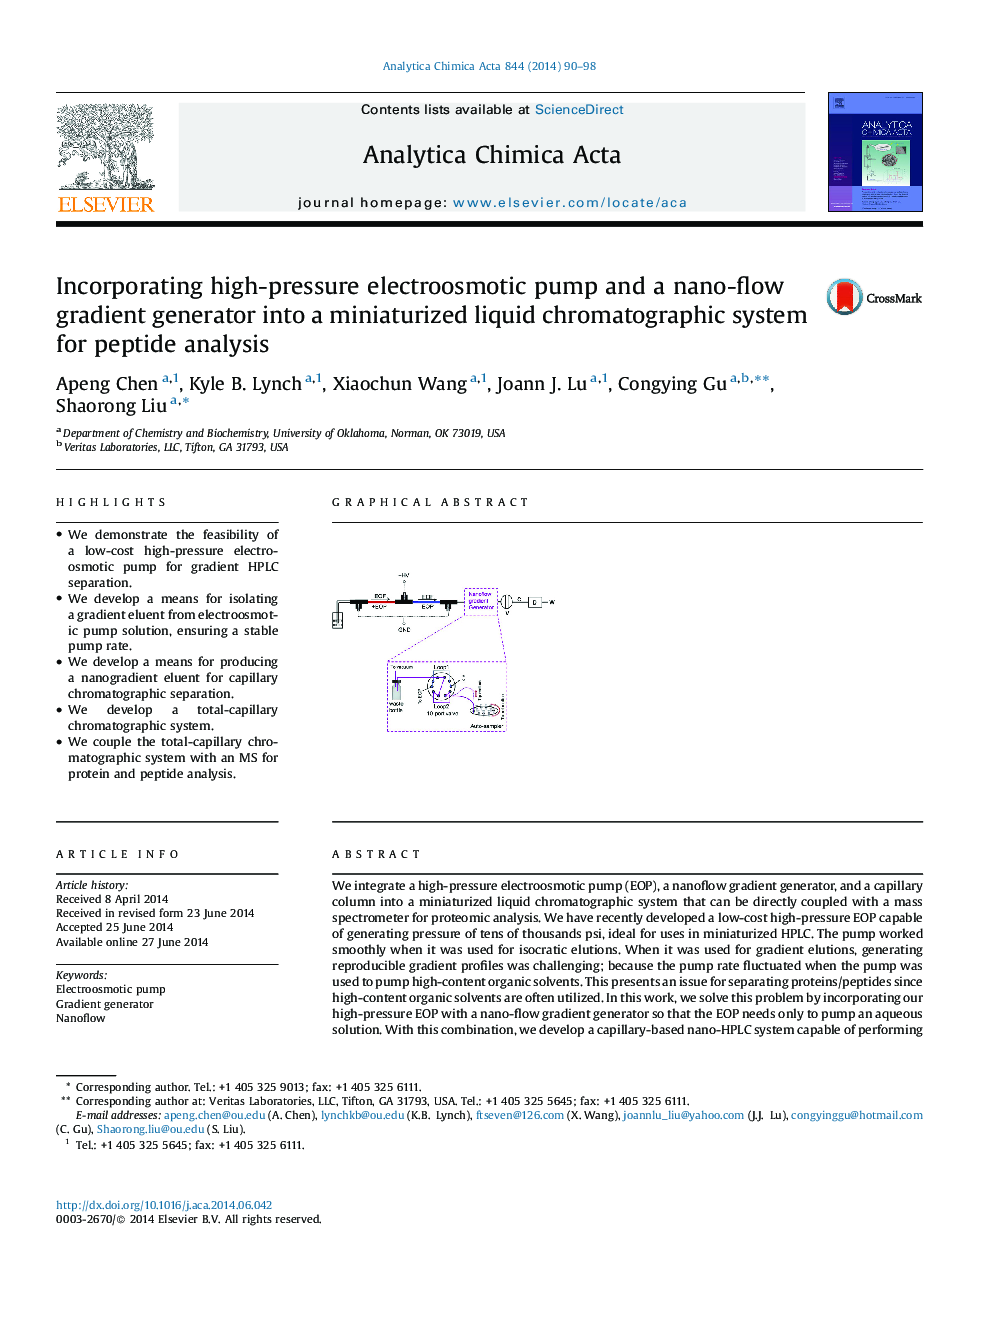 Incorporating high-pressure electroosmotic pump and a nano-flow gradient generator into a miniaturized liquid chromatographic system for peptide analysis